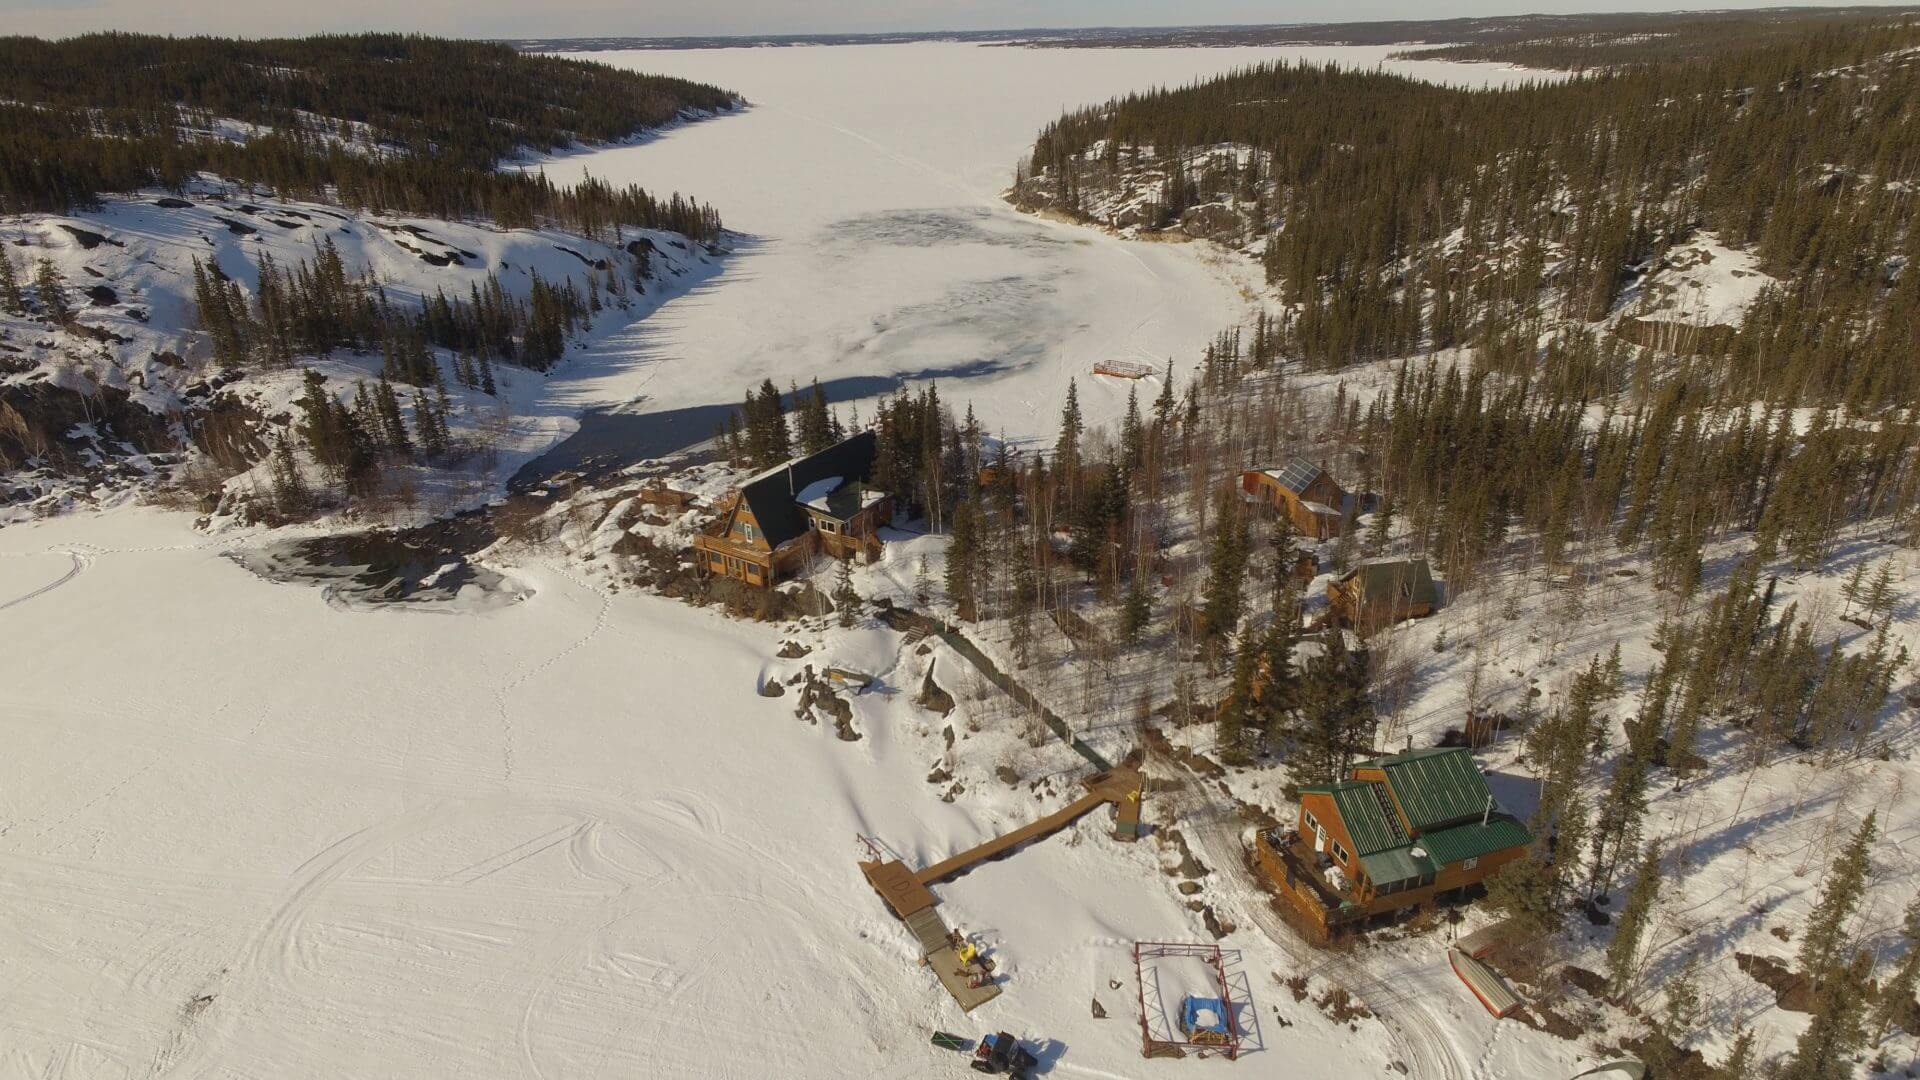 If you come to Yellow Dog Lodge in the winter you will see and experience some spectacular scenery form the air. Fly over the lodge and get that perfect aerial photo and get to see the vast wilderness from your float or ski plane.